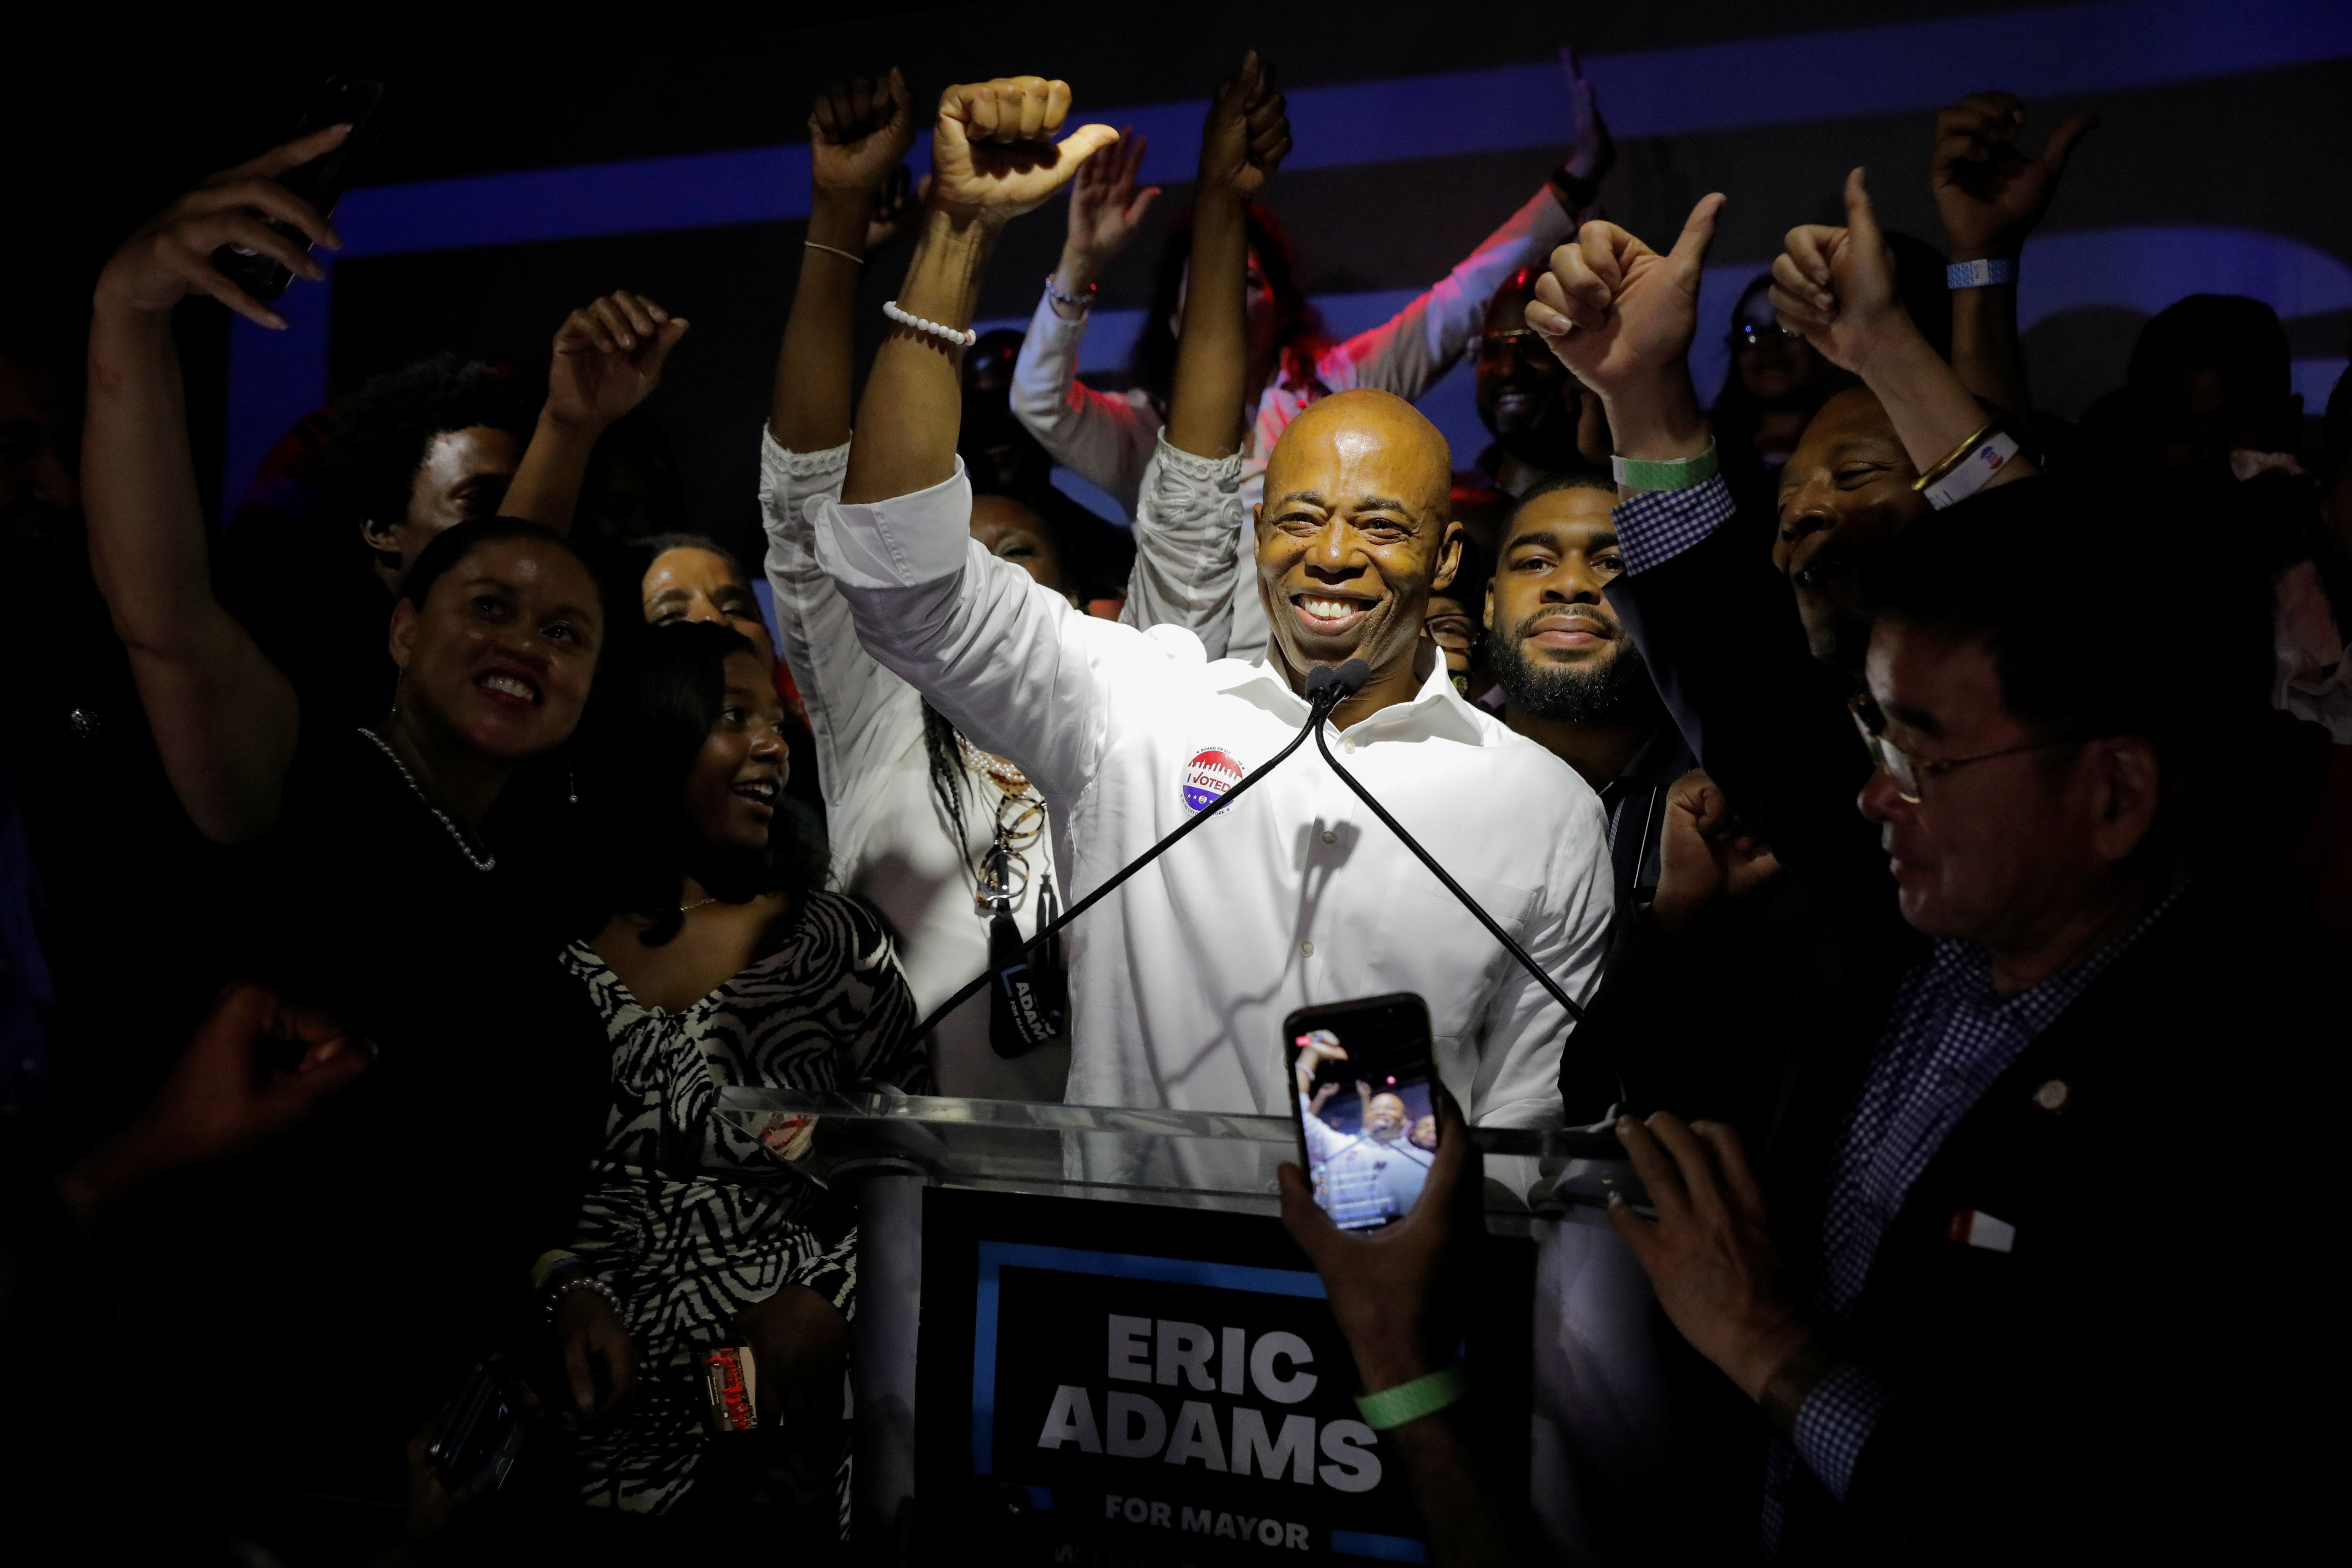 Eric Adams celebrates on primary election night, which saw him in an early lead with roughly 30 per cent of the vote from in-person ballots.